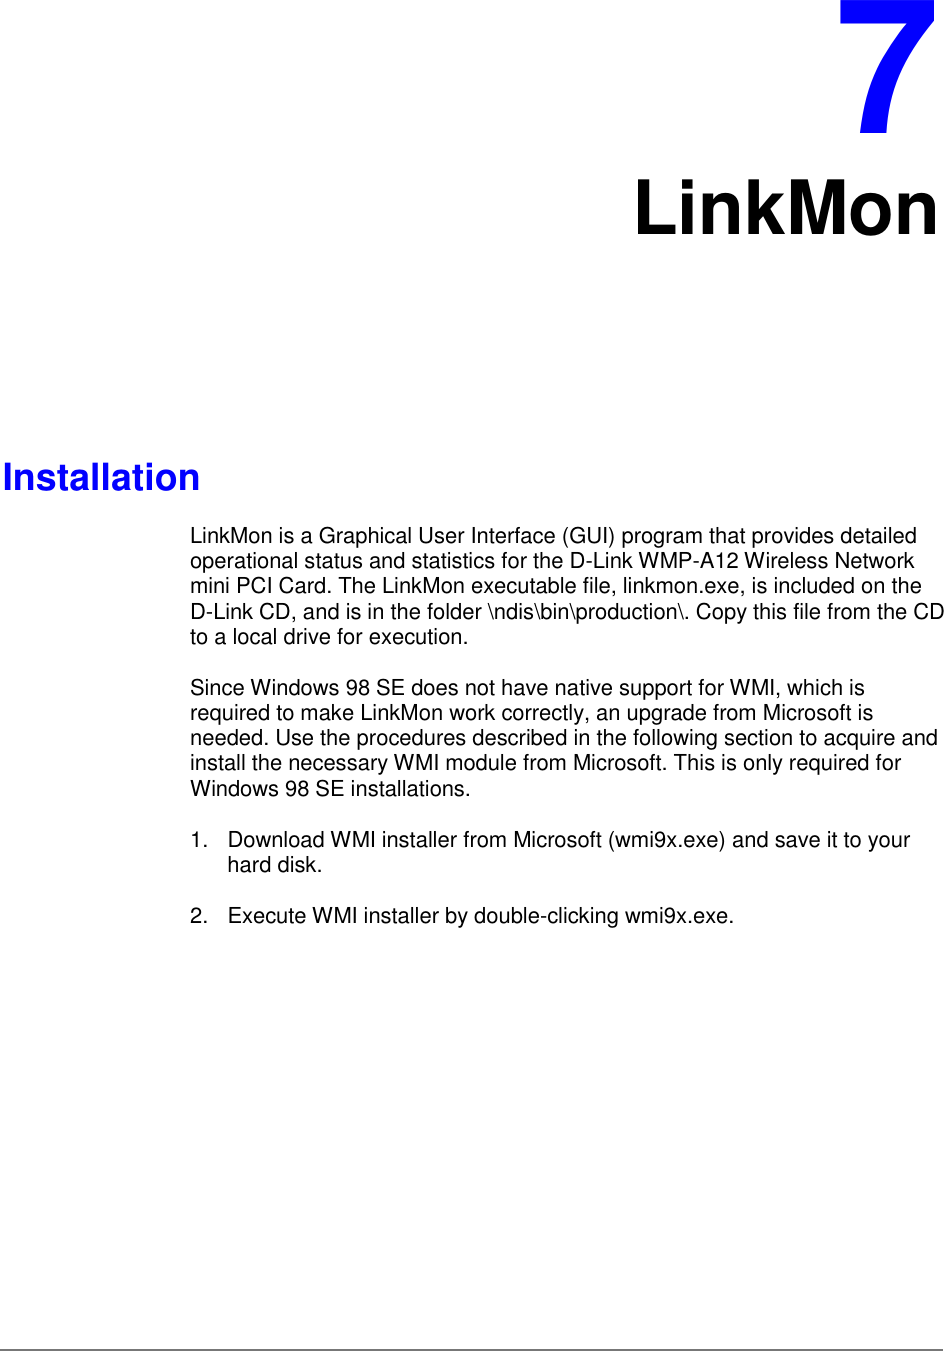 7LinkMonInstallationLinkMon is a Graphical User Interface (GUI) program that provides detailedoperational status and statistics for the D-Link WMP-A12 Wireless Networkmini PCI Card. The LinkMon executable file, linkmon.exe, is included on theD-Link CD, and is in the folder \ndis\bin\production\. Copy this file from the CDto a local drive for execution.Since Windows 98 SE does not have native support for WMI, which isrequired to make LinkMon work correctly, an upgrade from Microsoft isneeded. Use the procedures described in the following section to acquire andinstall the necessary WMI module from Microsoft. This is only required forWindows 98 SE installations.1.  Download WMI installer from Microsoft (wmi9x.exe) and save it to yourhard disk.2.  Execute WMI installer by double-clicking wmi9x.exe.